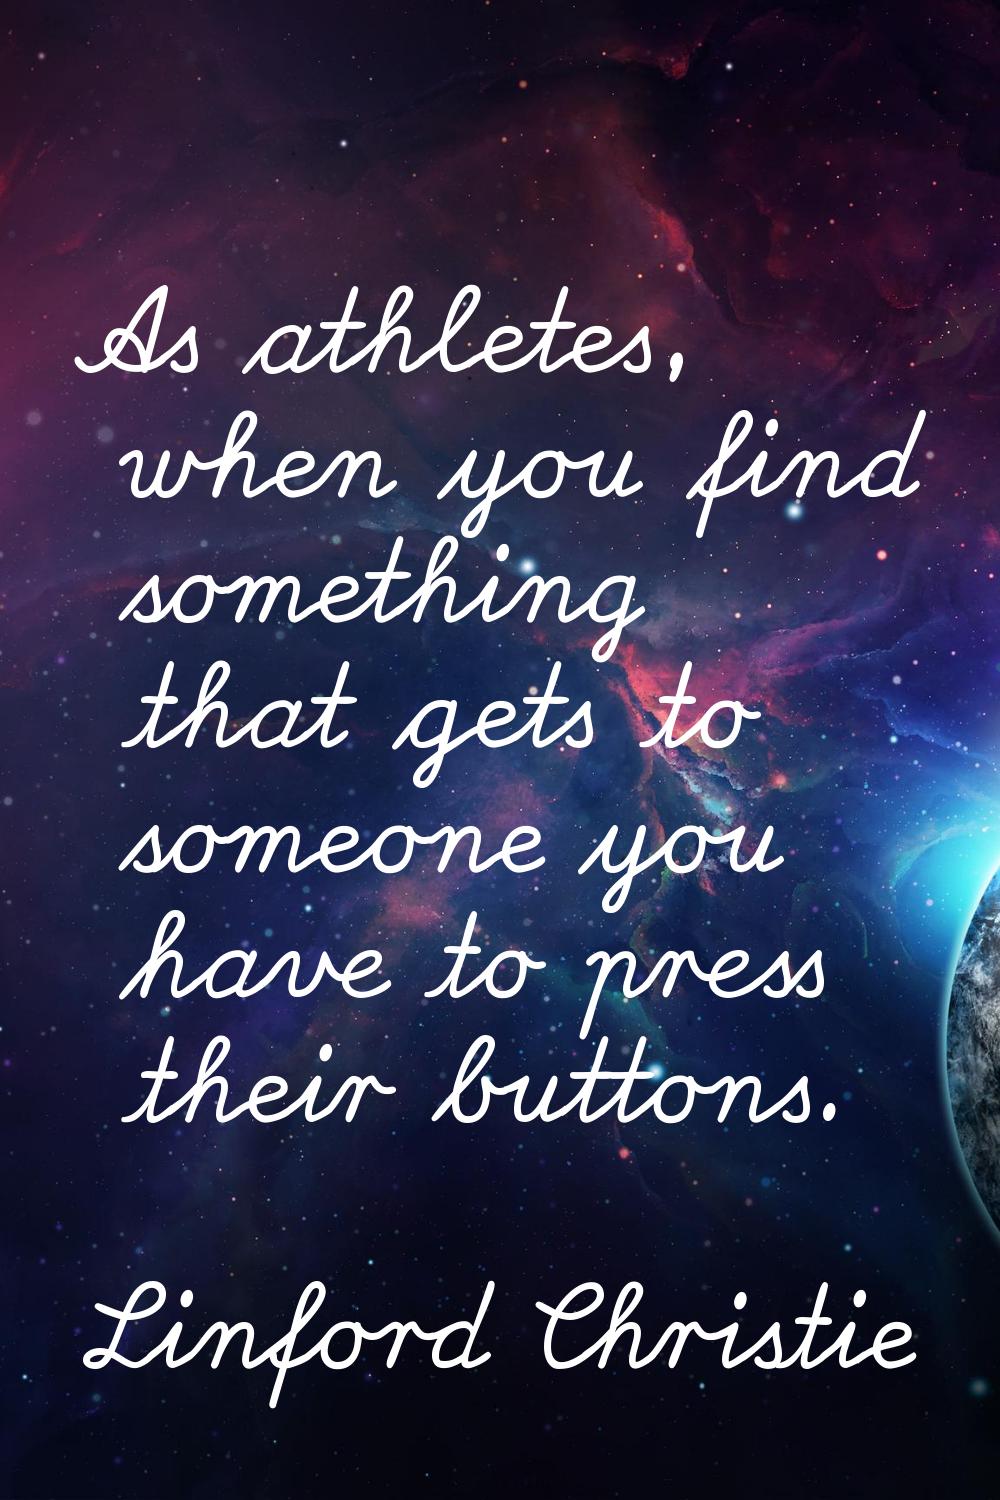 As athletes, when you find something that gets to someone you have to press their buttons.